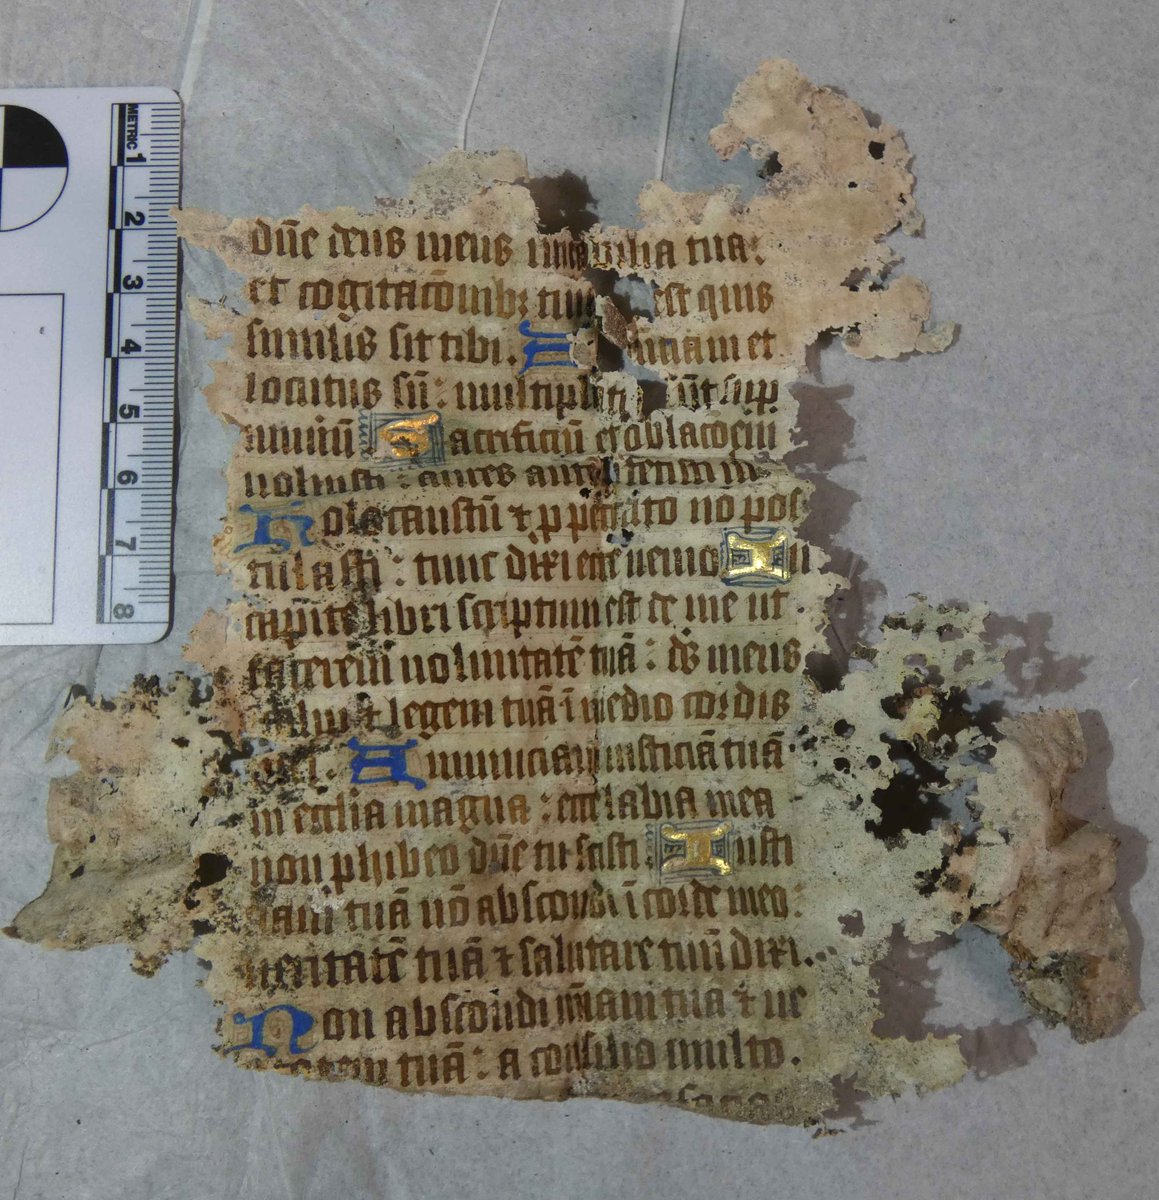 However, the two star finds weren't found by me at all - but by the builders - all of whom got the archaeology 'bug'. The first was found by Rob Jessop, who literally pulled a page of a C15th manuscript out of the rubble, passed it to me, and quietly asking 'is this anything'.